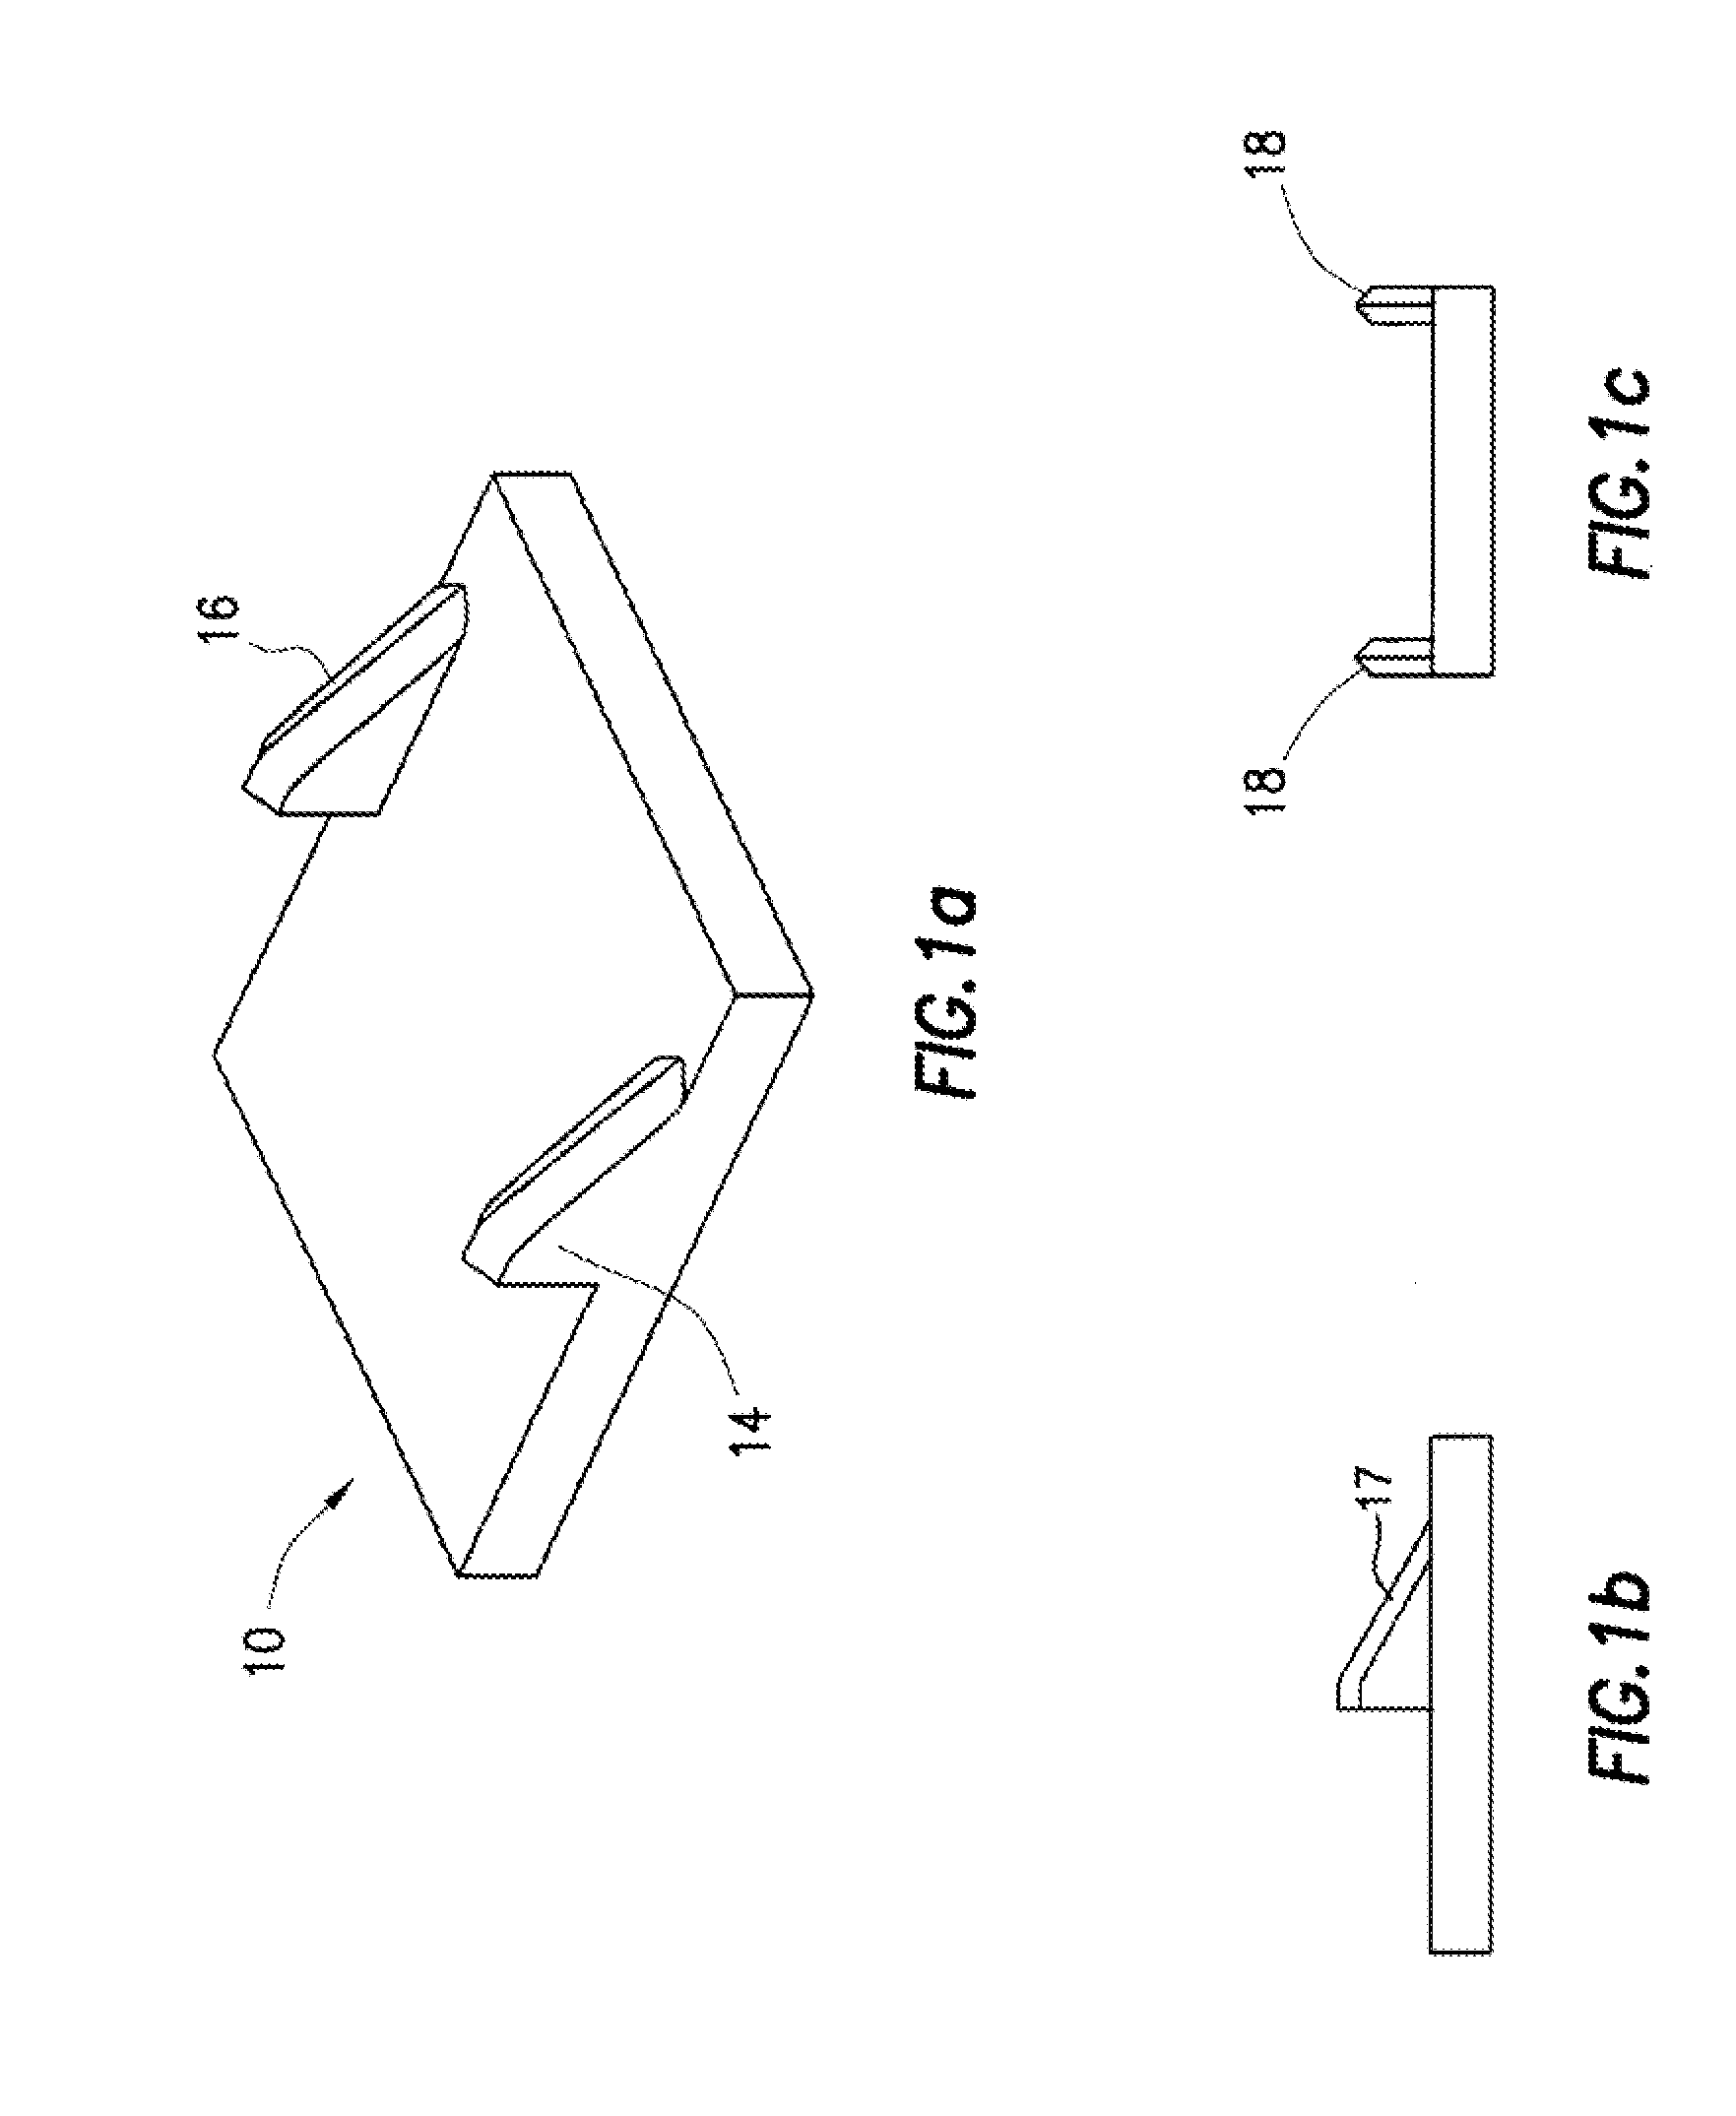 Downhole rock scratcher and method for identifying strength of subsurface intervals